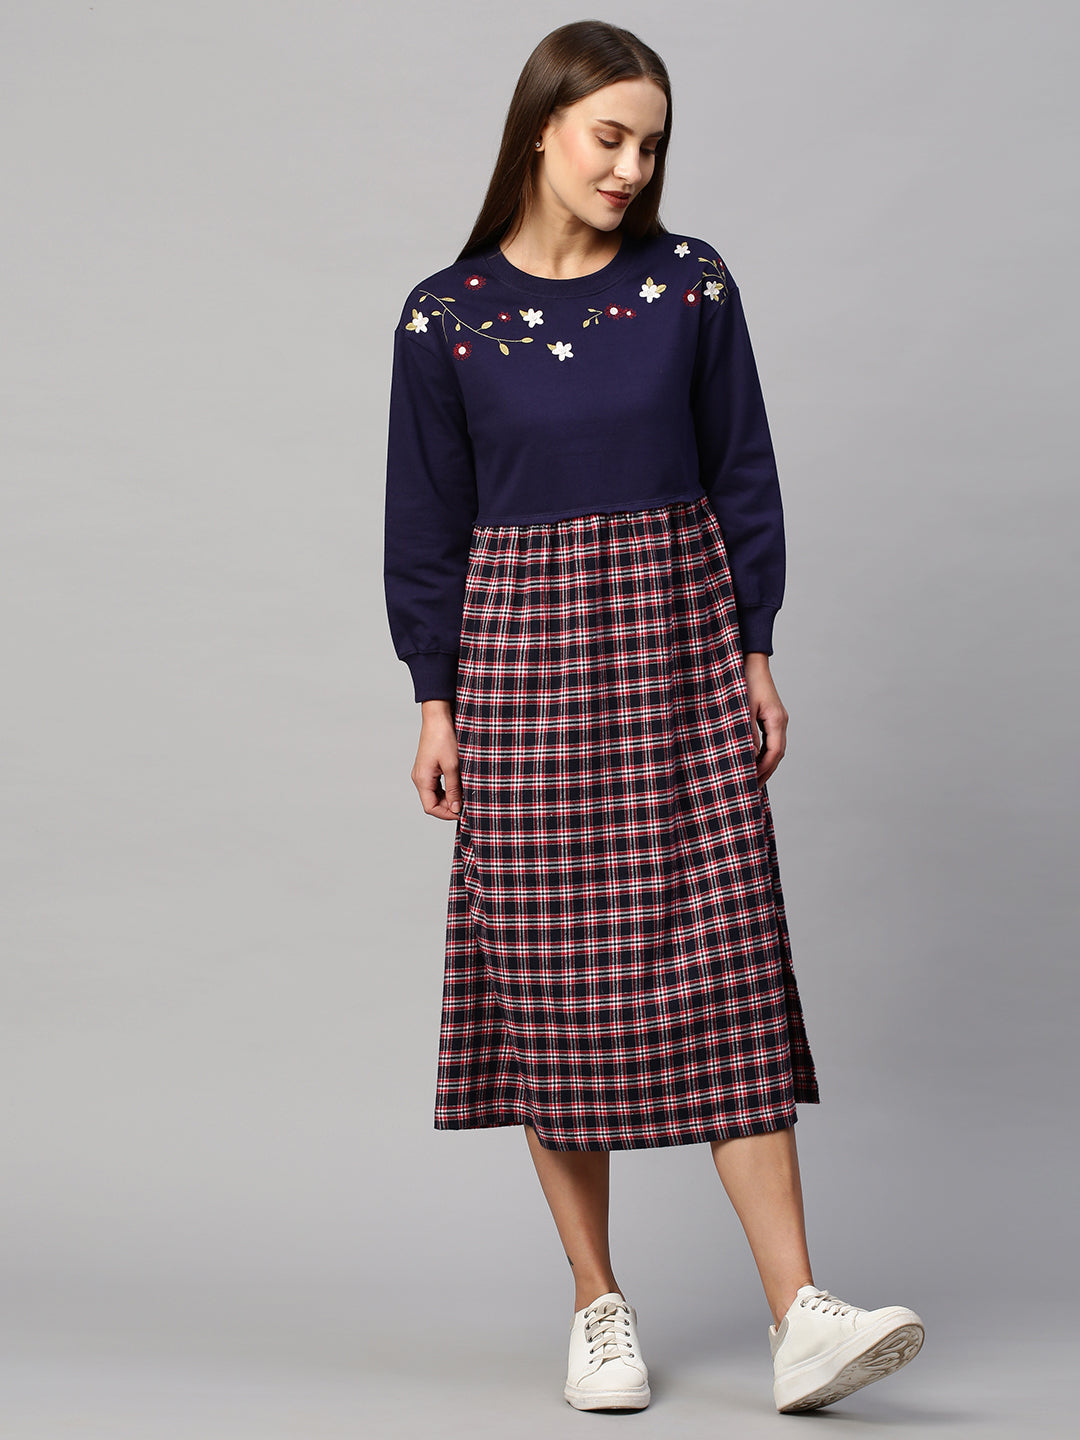 Navy French Terry & Plaid Brushed Flannel Embroidered Sweatshirt Dress